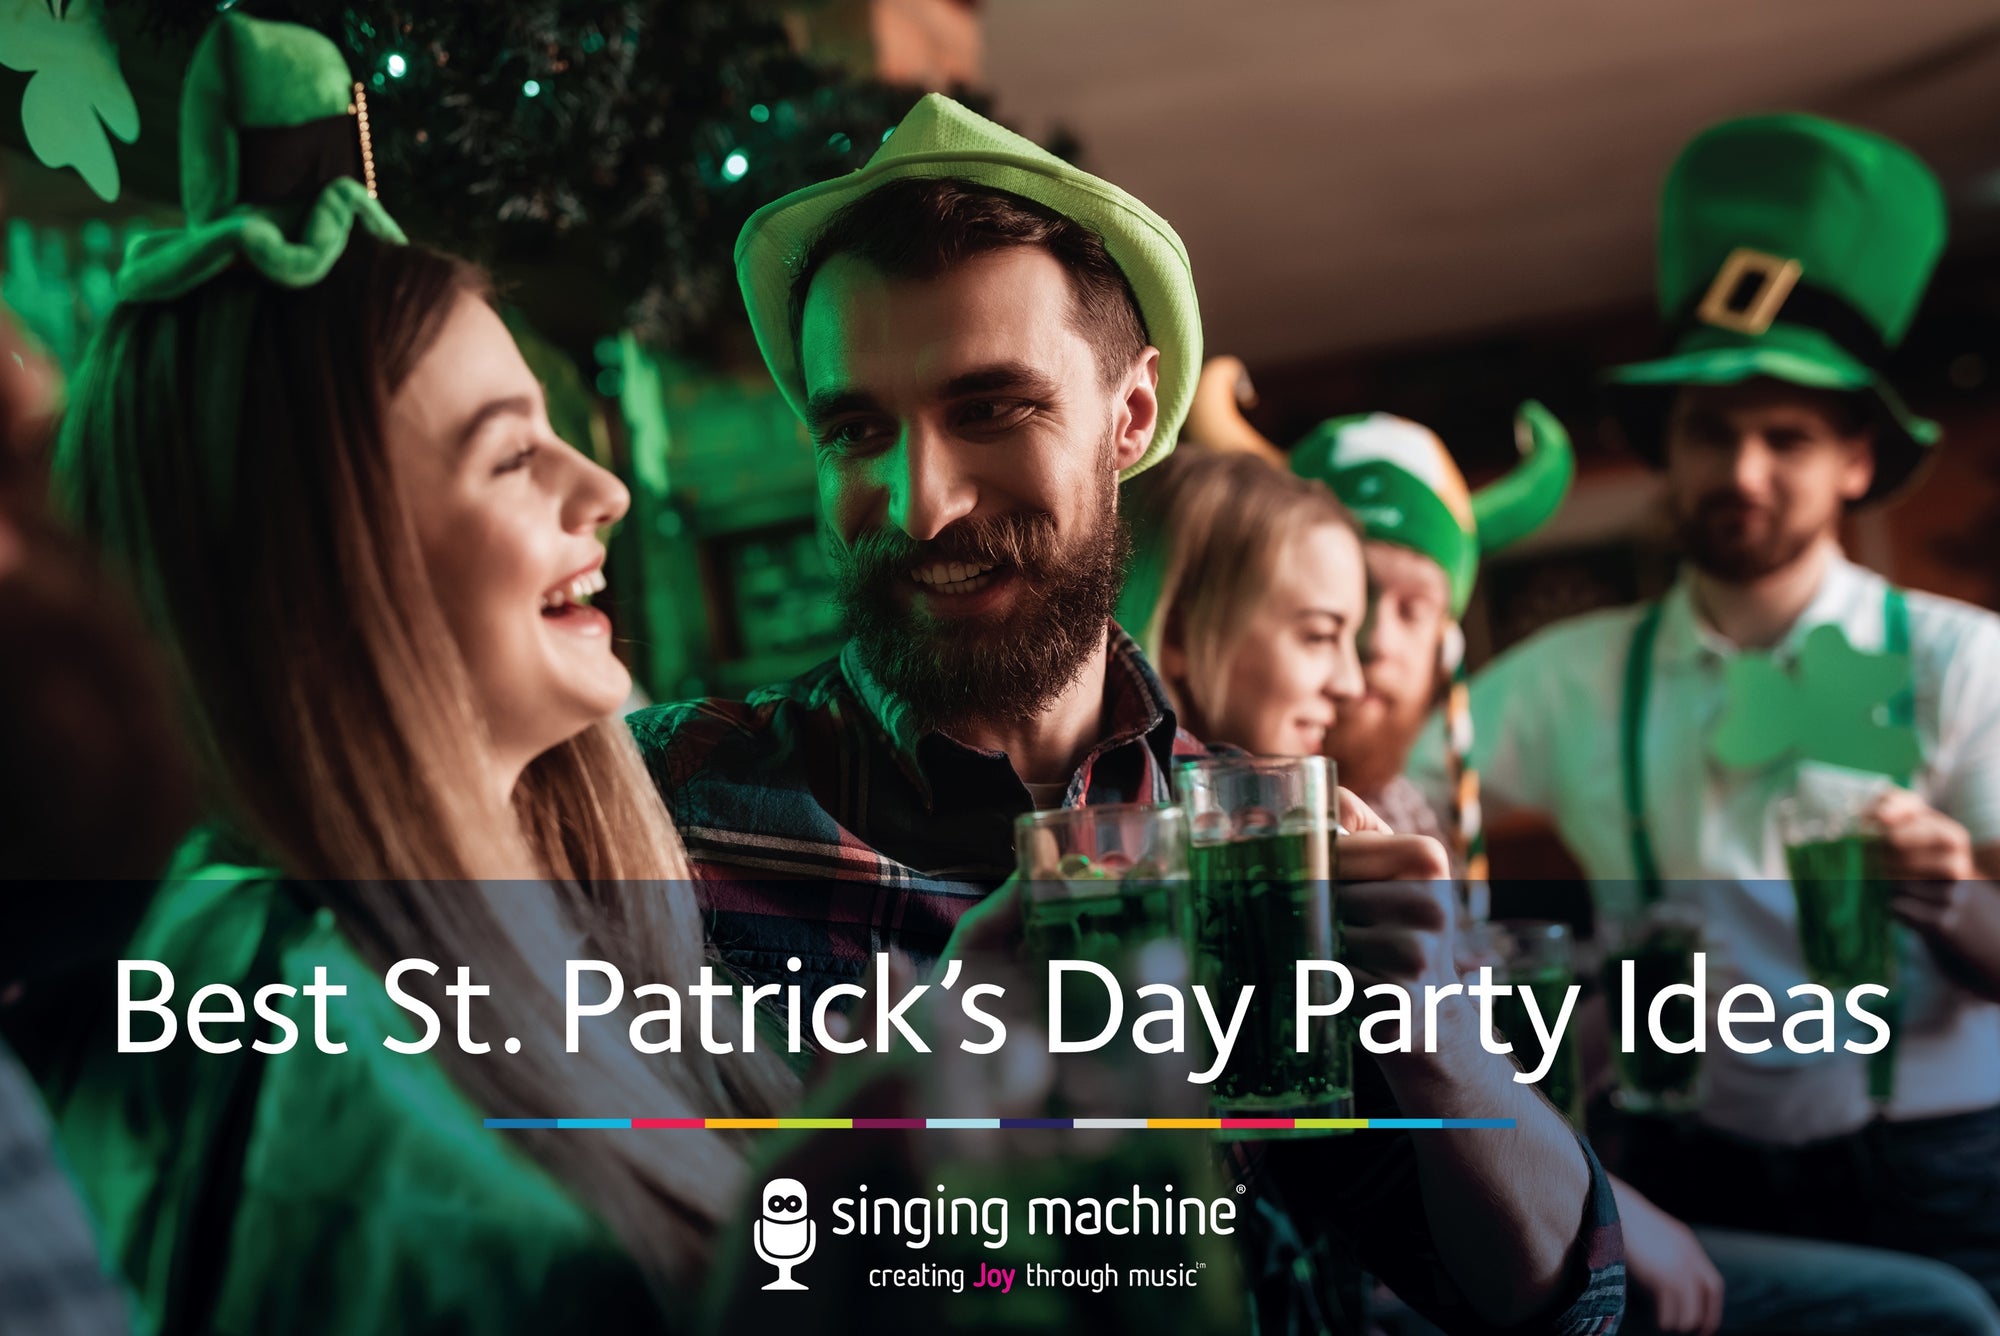 Best St. Patrick's Day Party Ideas